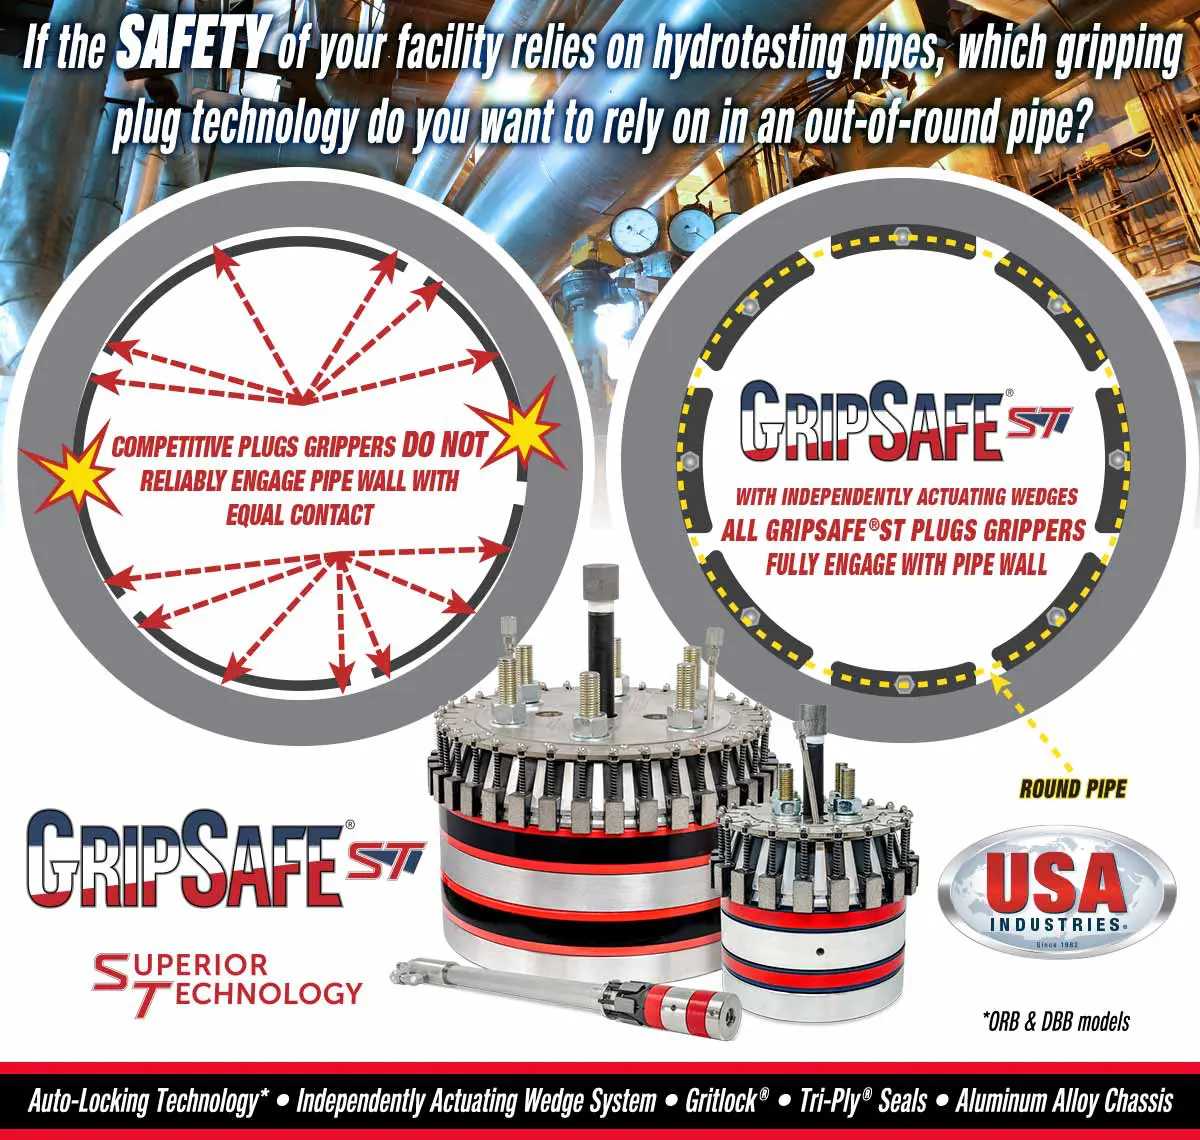 GSST-USA-Industries-Out-of-Round-Pipe-SAFETY-6